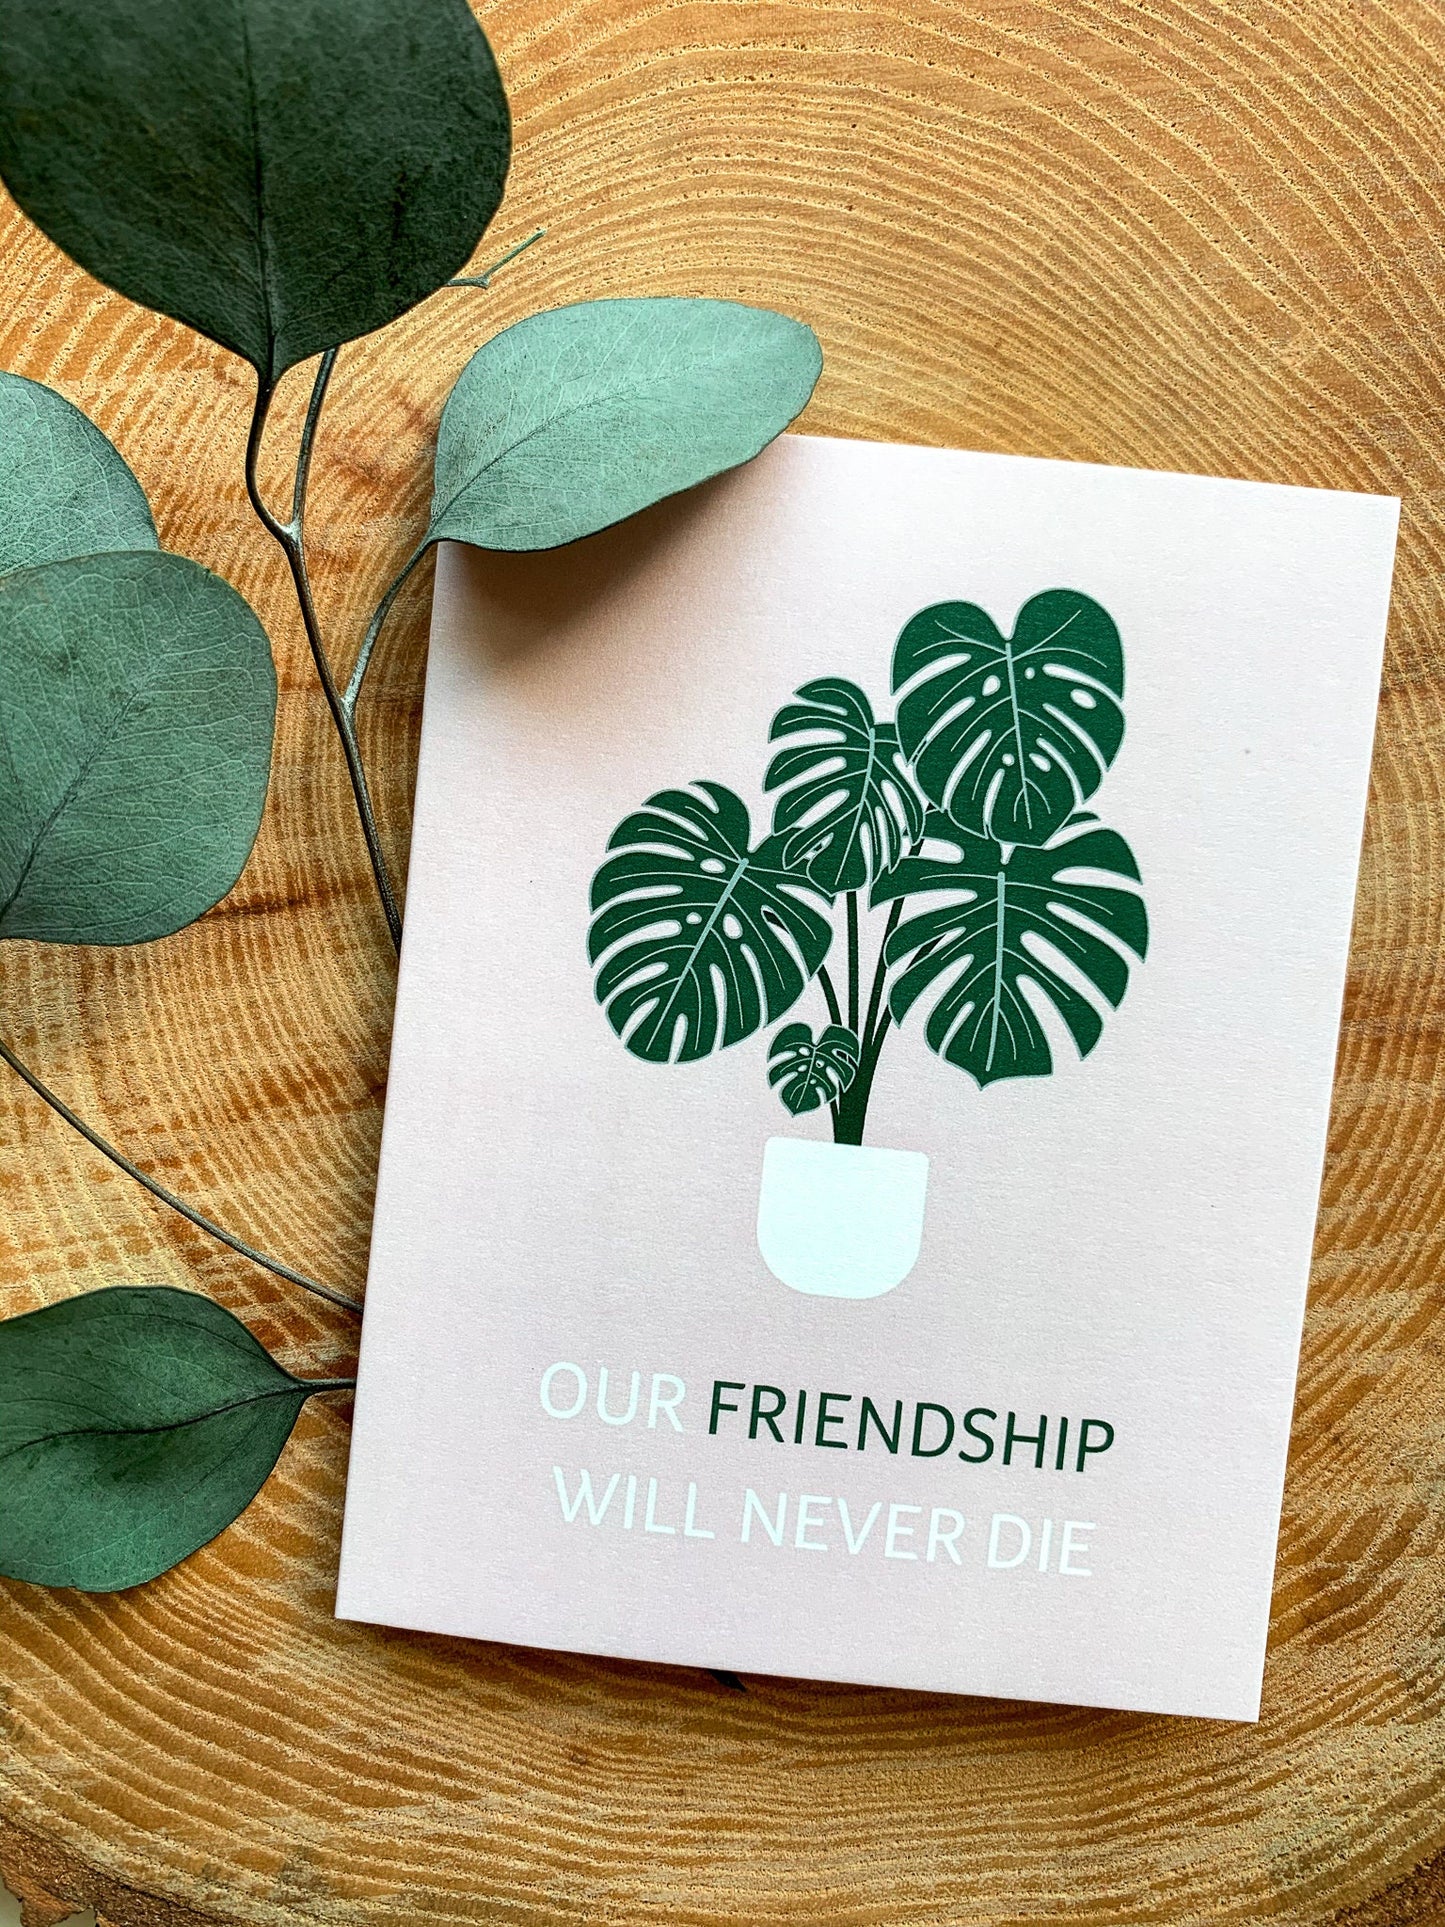 Our Friendship will Never Die Greeting Card